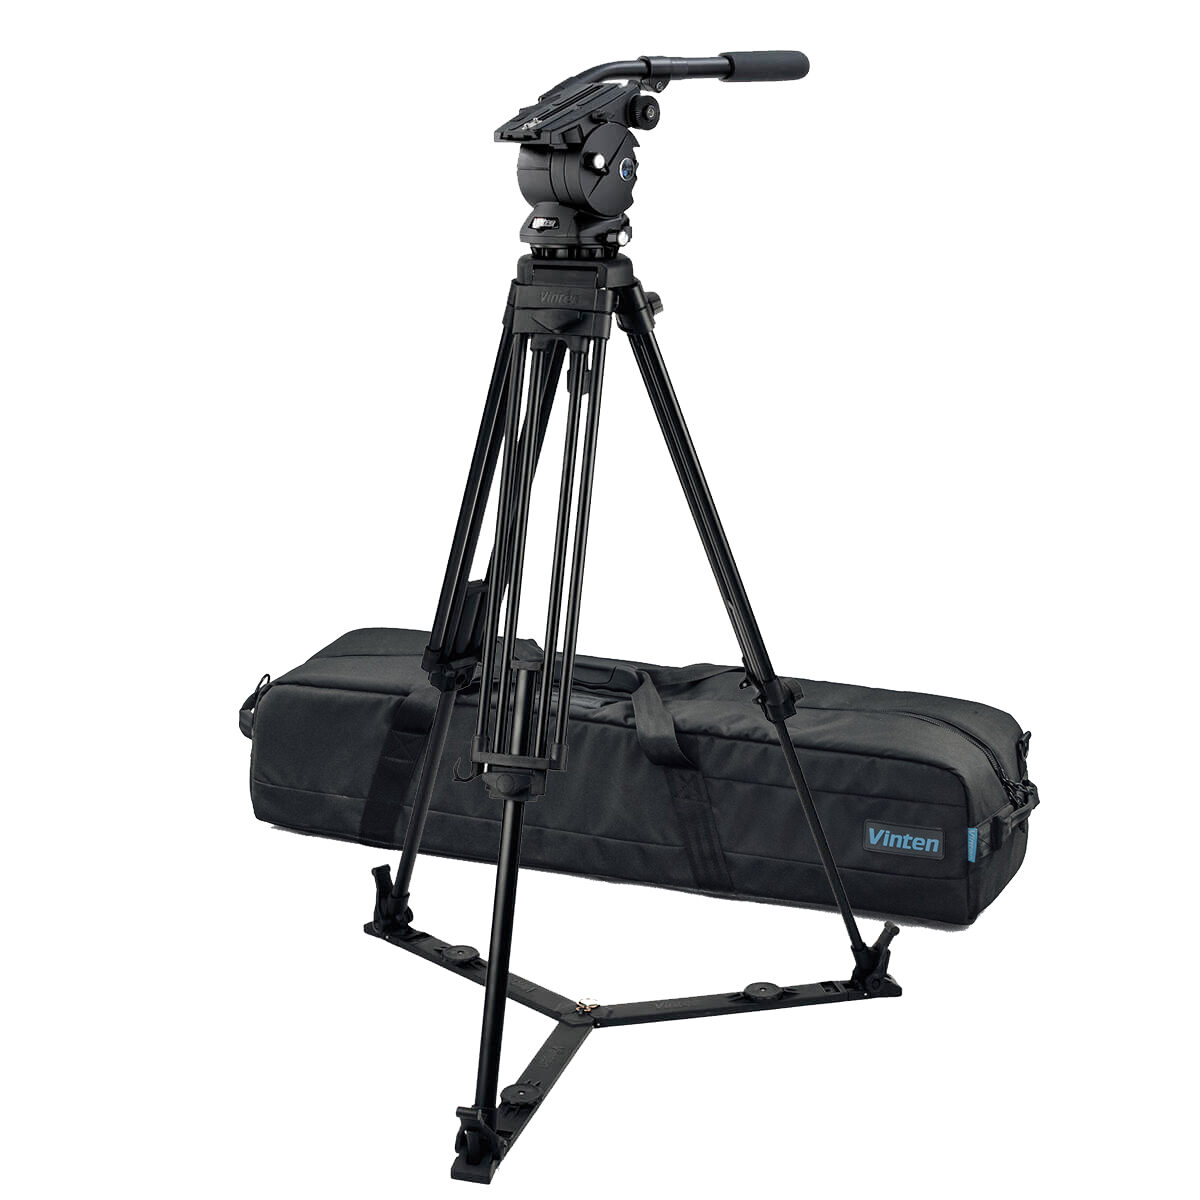 Vision 10AS 2-Stage Aluminium Tripod System with Ground Spreader